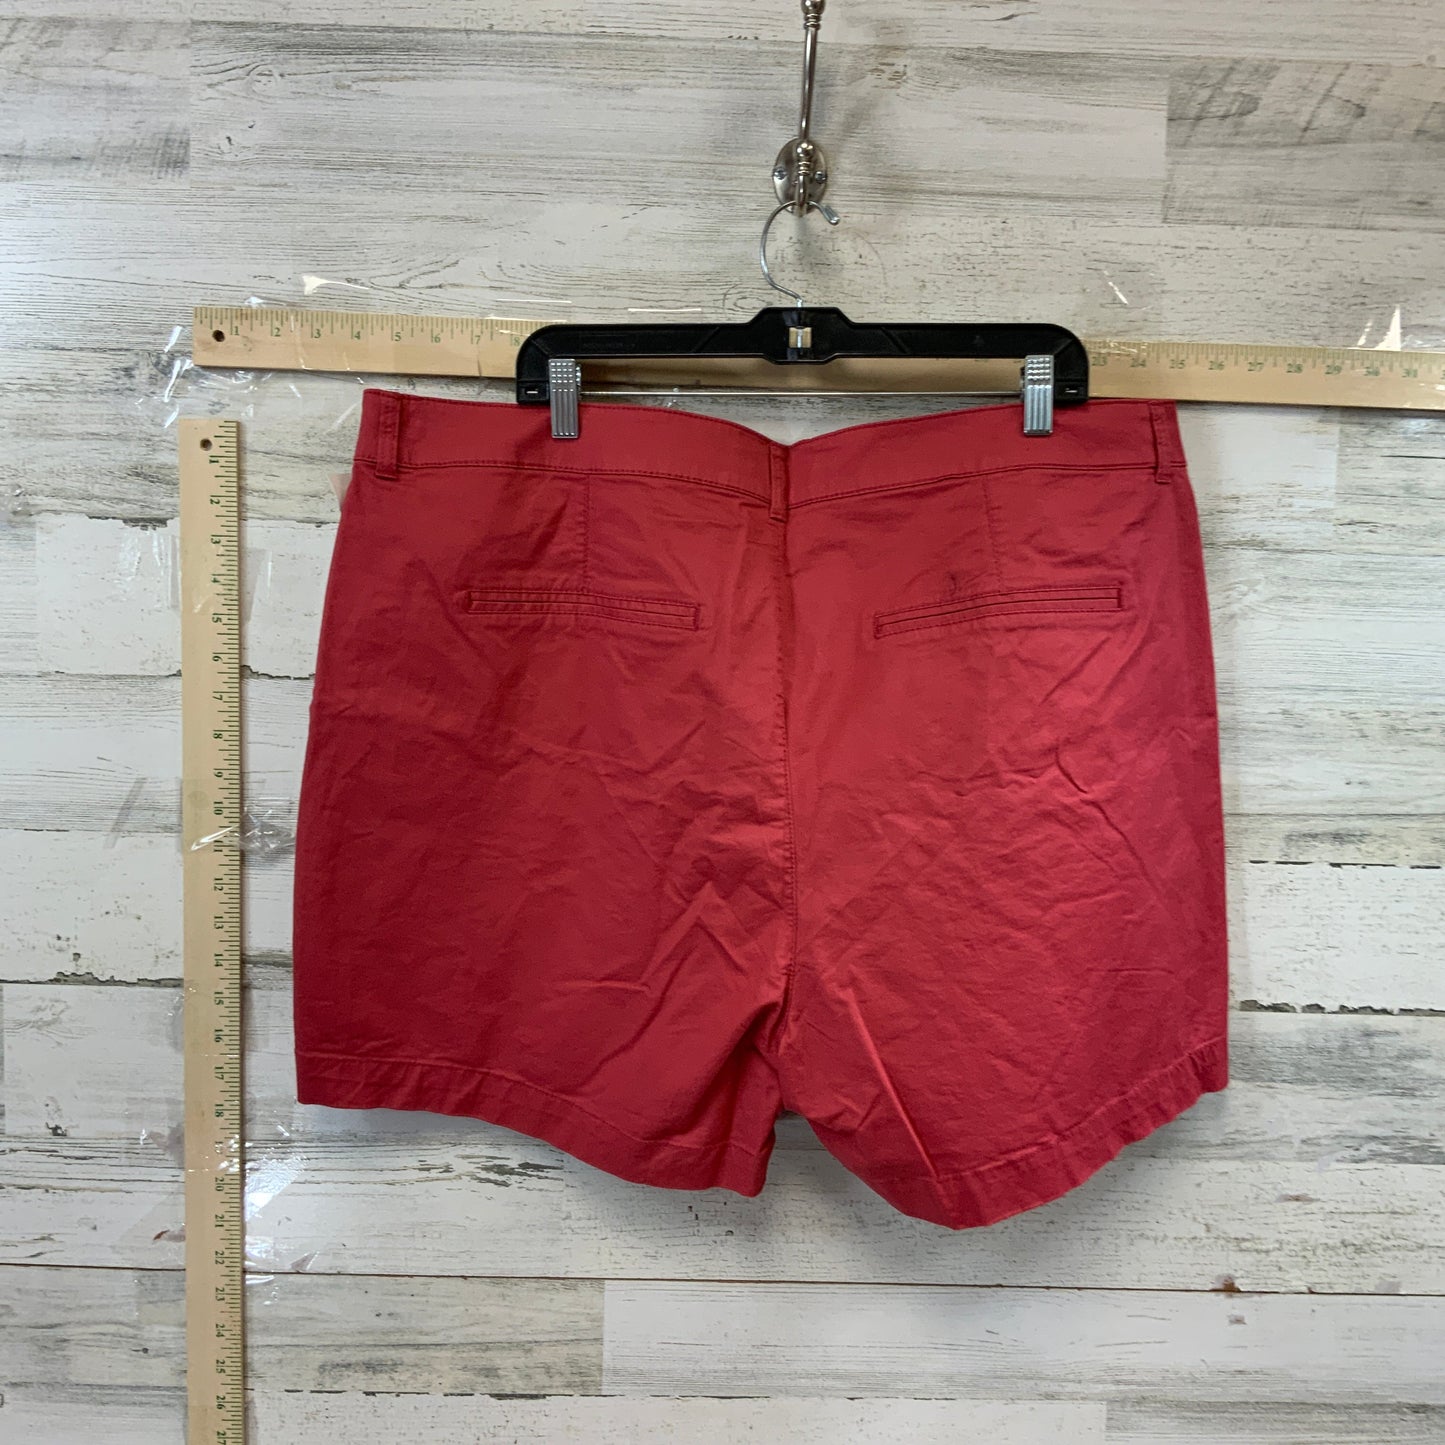 Red Shorts Old Navy, Size 20w